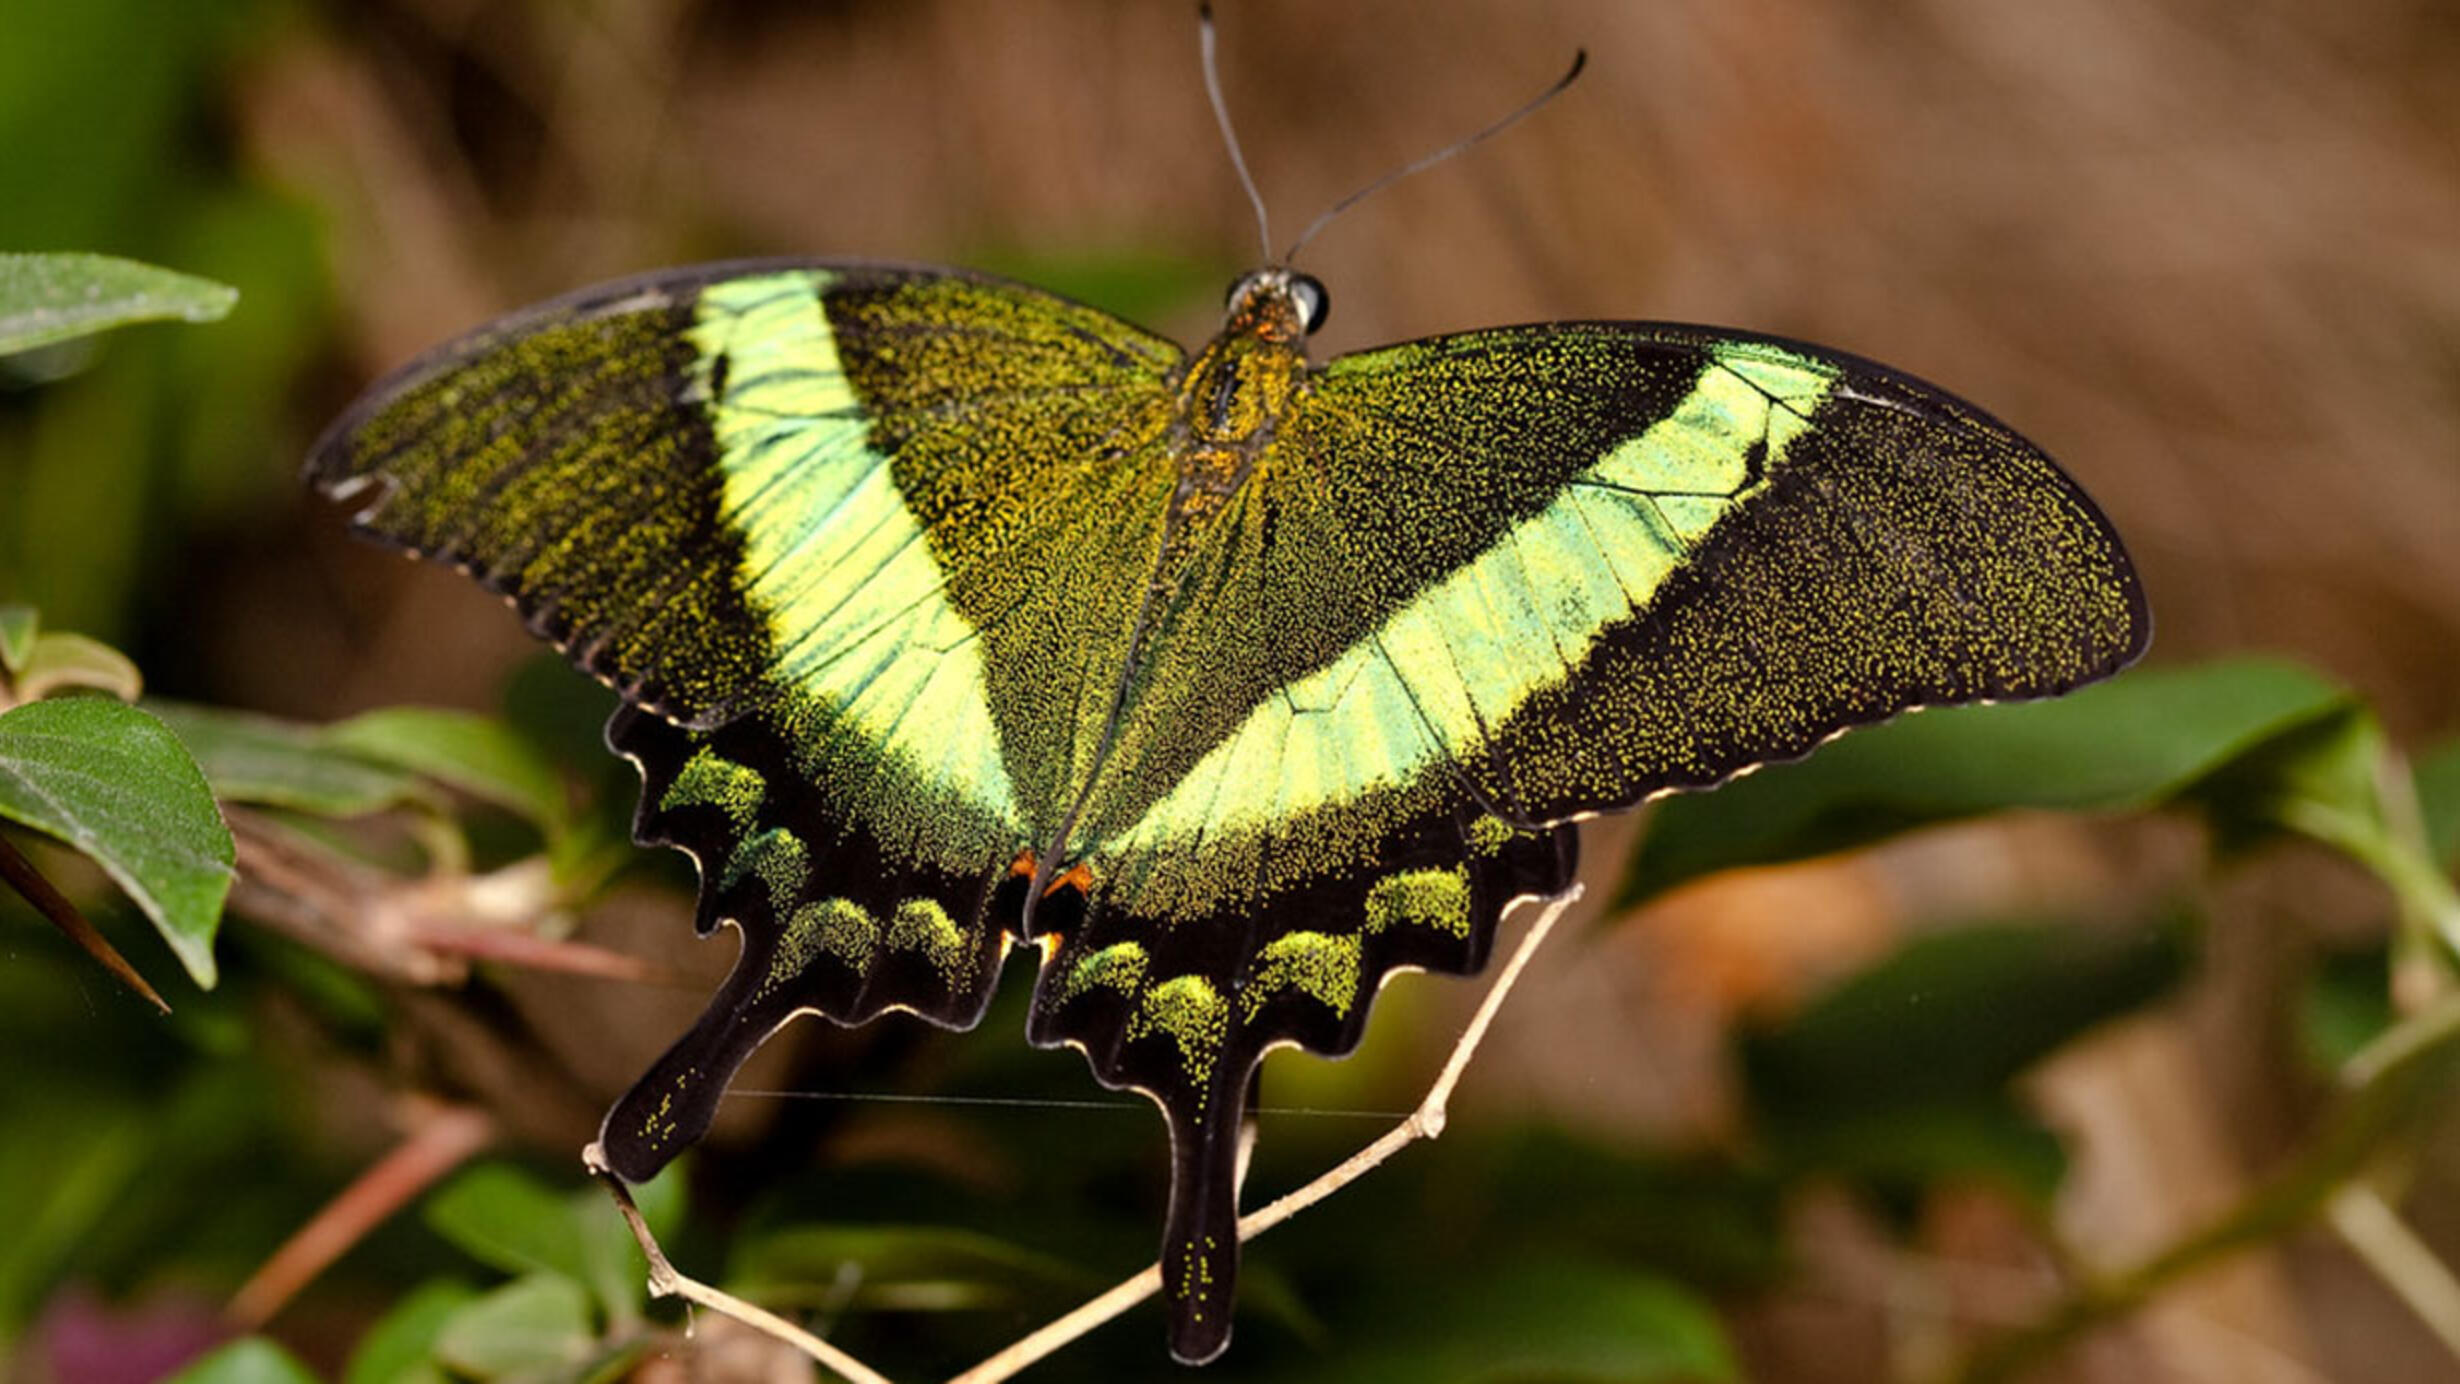 Swallowtail butterfly with wings spread rests on a leafy branch.